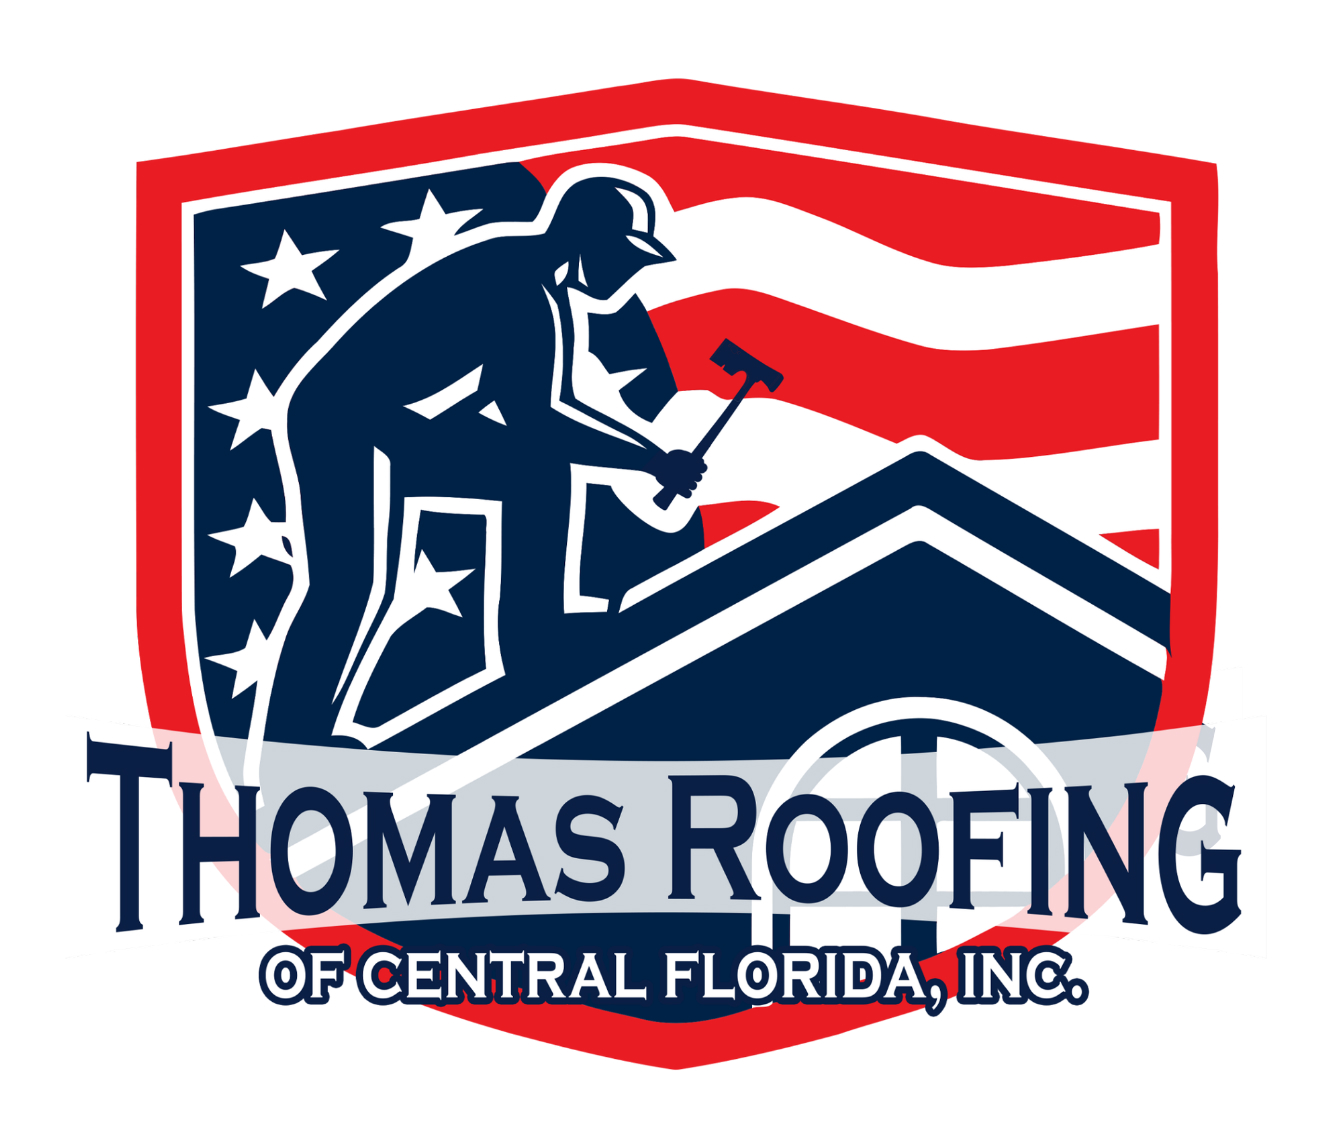 Thomas Roofing of Central Florida Inc